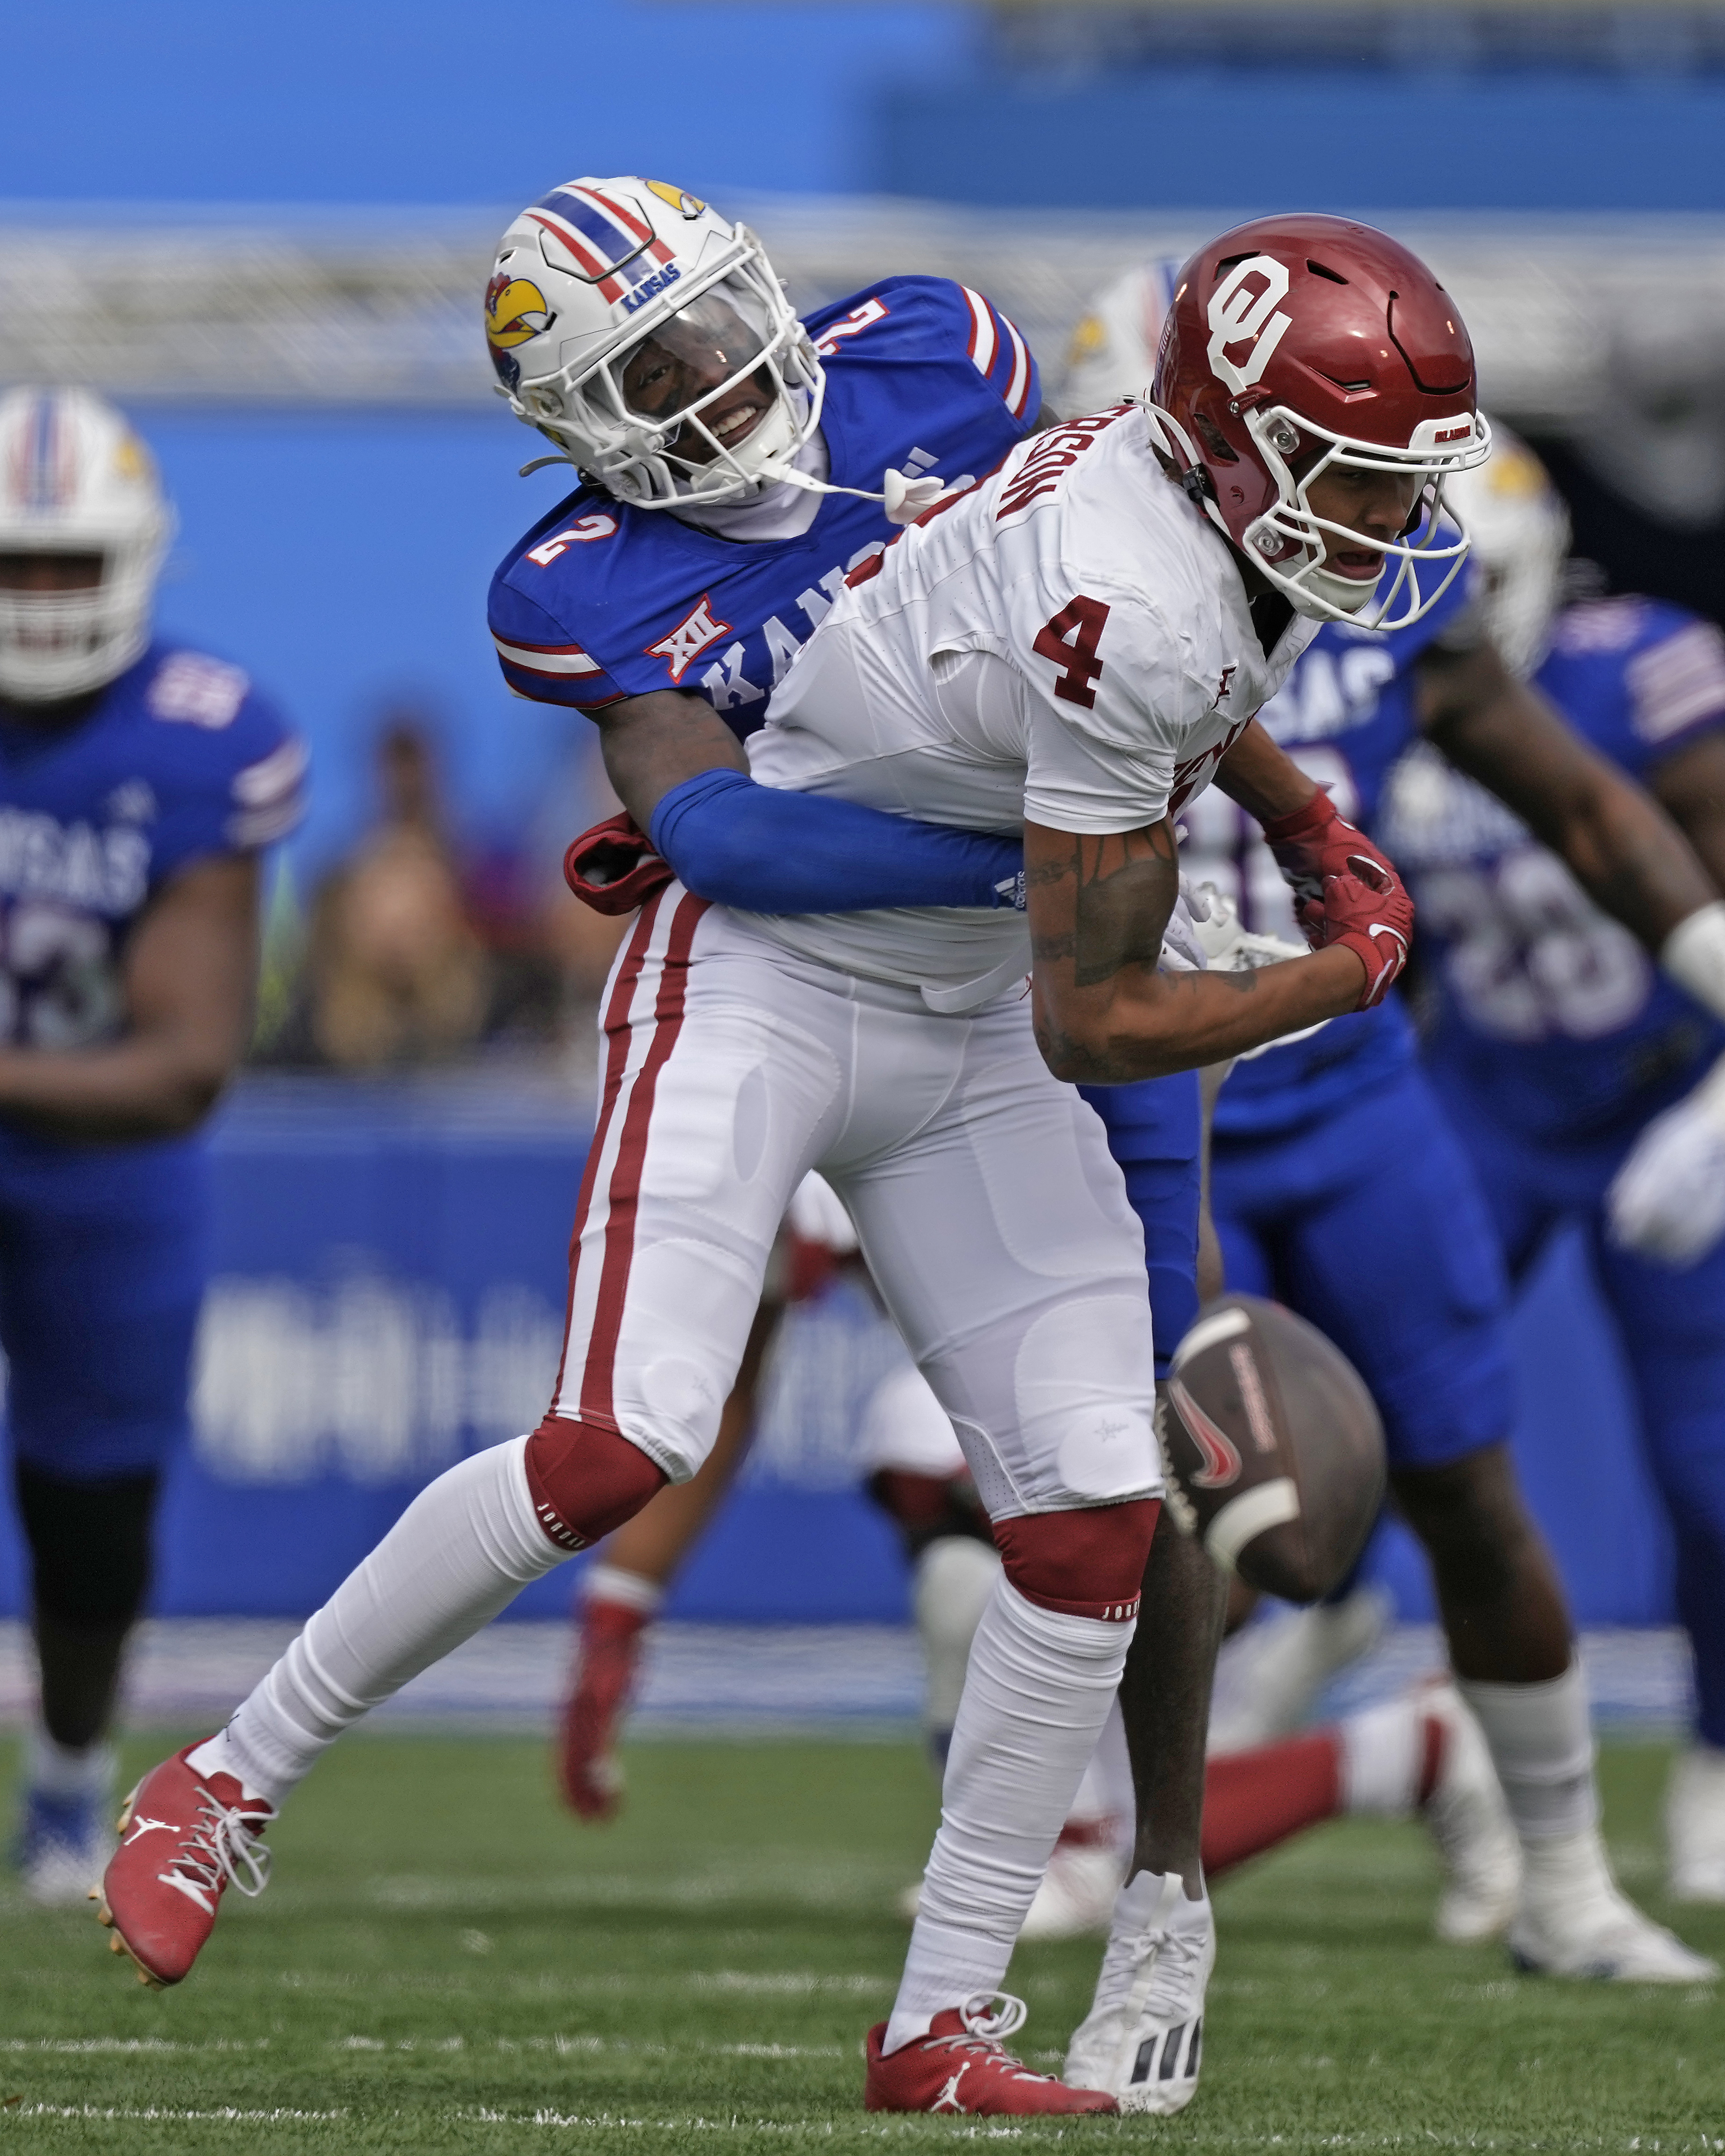 Neal scores go-ahead TD with 55 seconds left, KU holds on to beat No. 6  Oklahoma 38-33 – WKRG News 5